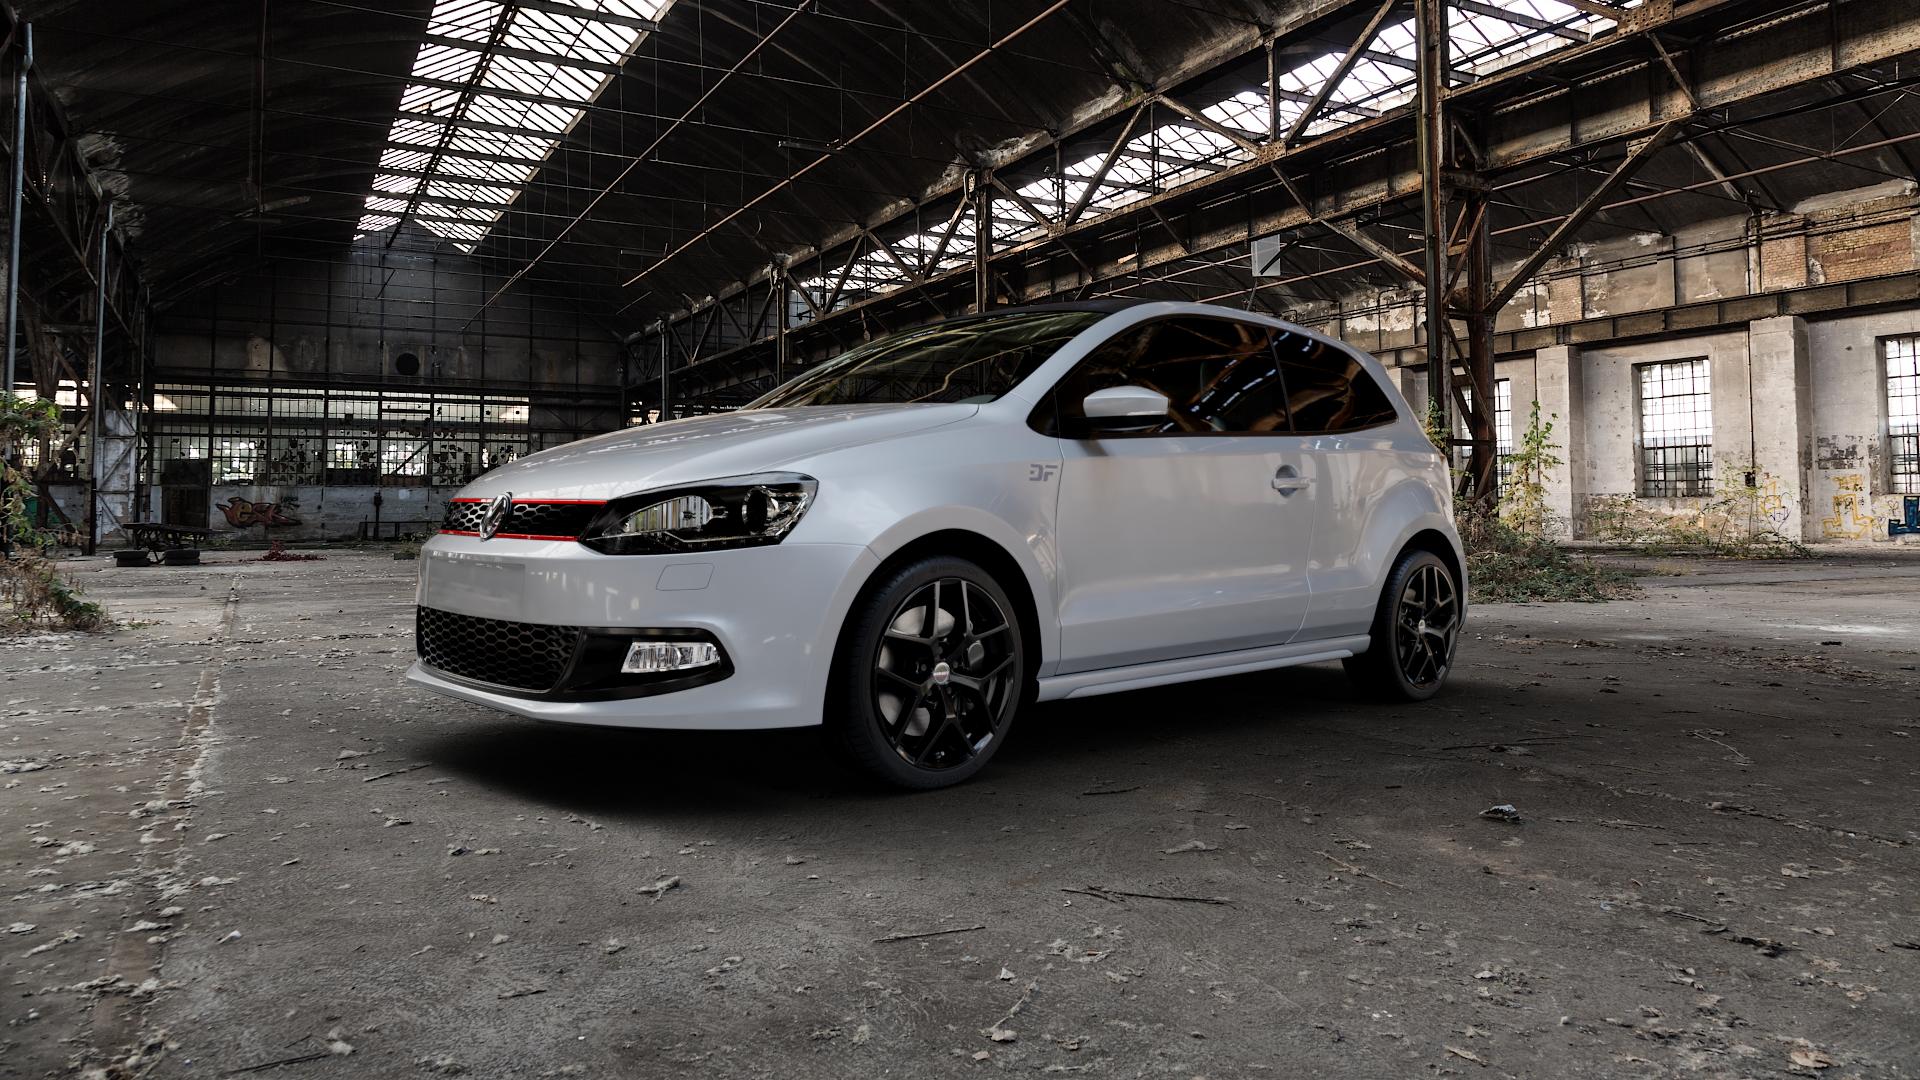 Got some pictures taken today of my recently modified Polo 9N3 : r